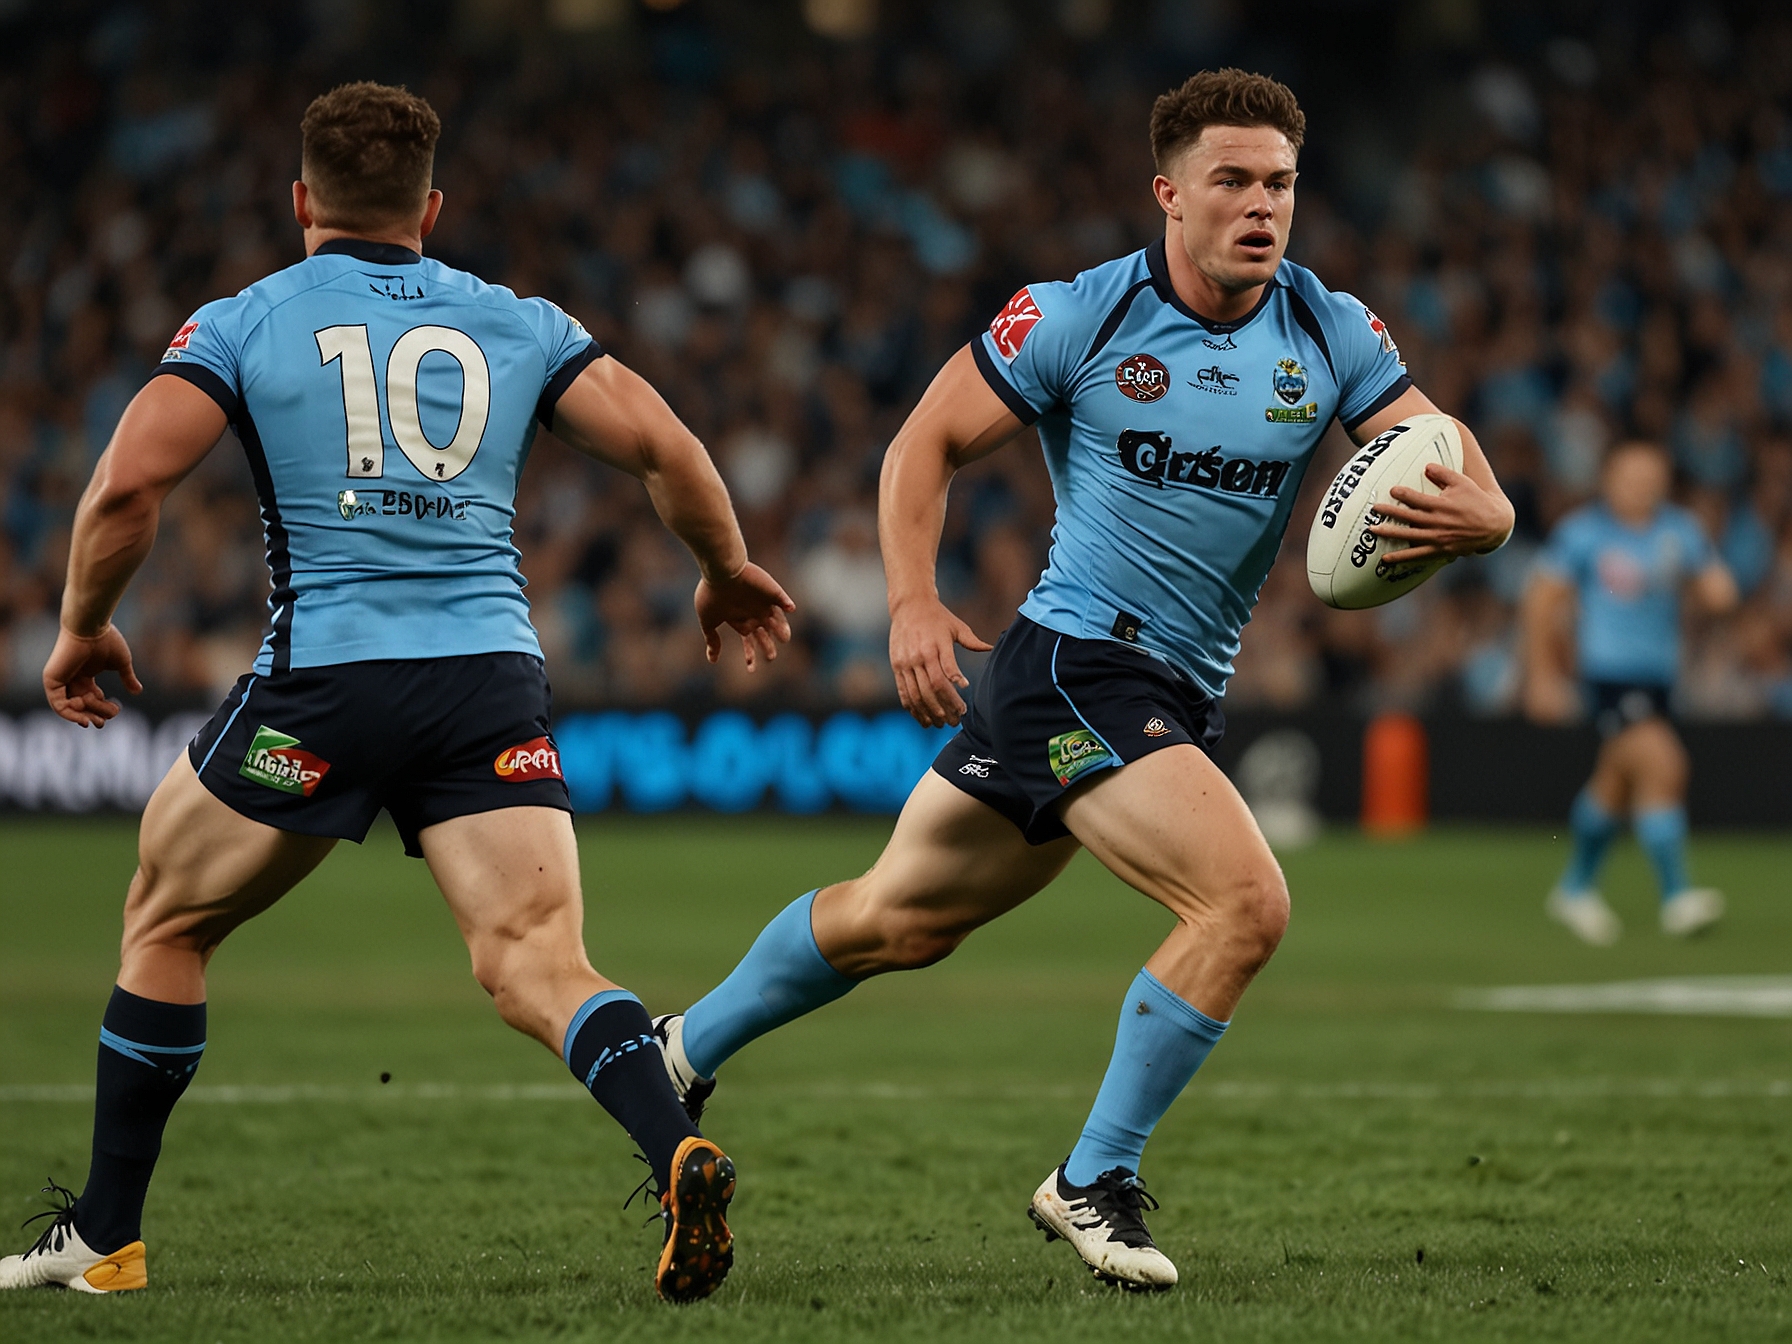 Reece Walsh in action during the first State of Origin game, showcasing his agility and speed, which has made him a focal point for NSW's defensive strategy in the upcoming game.